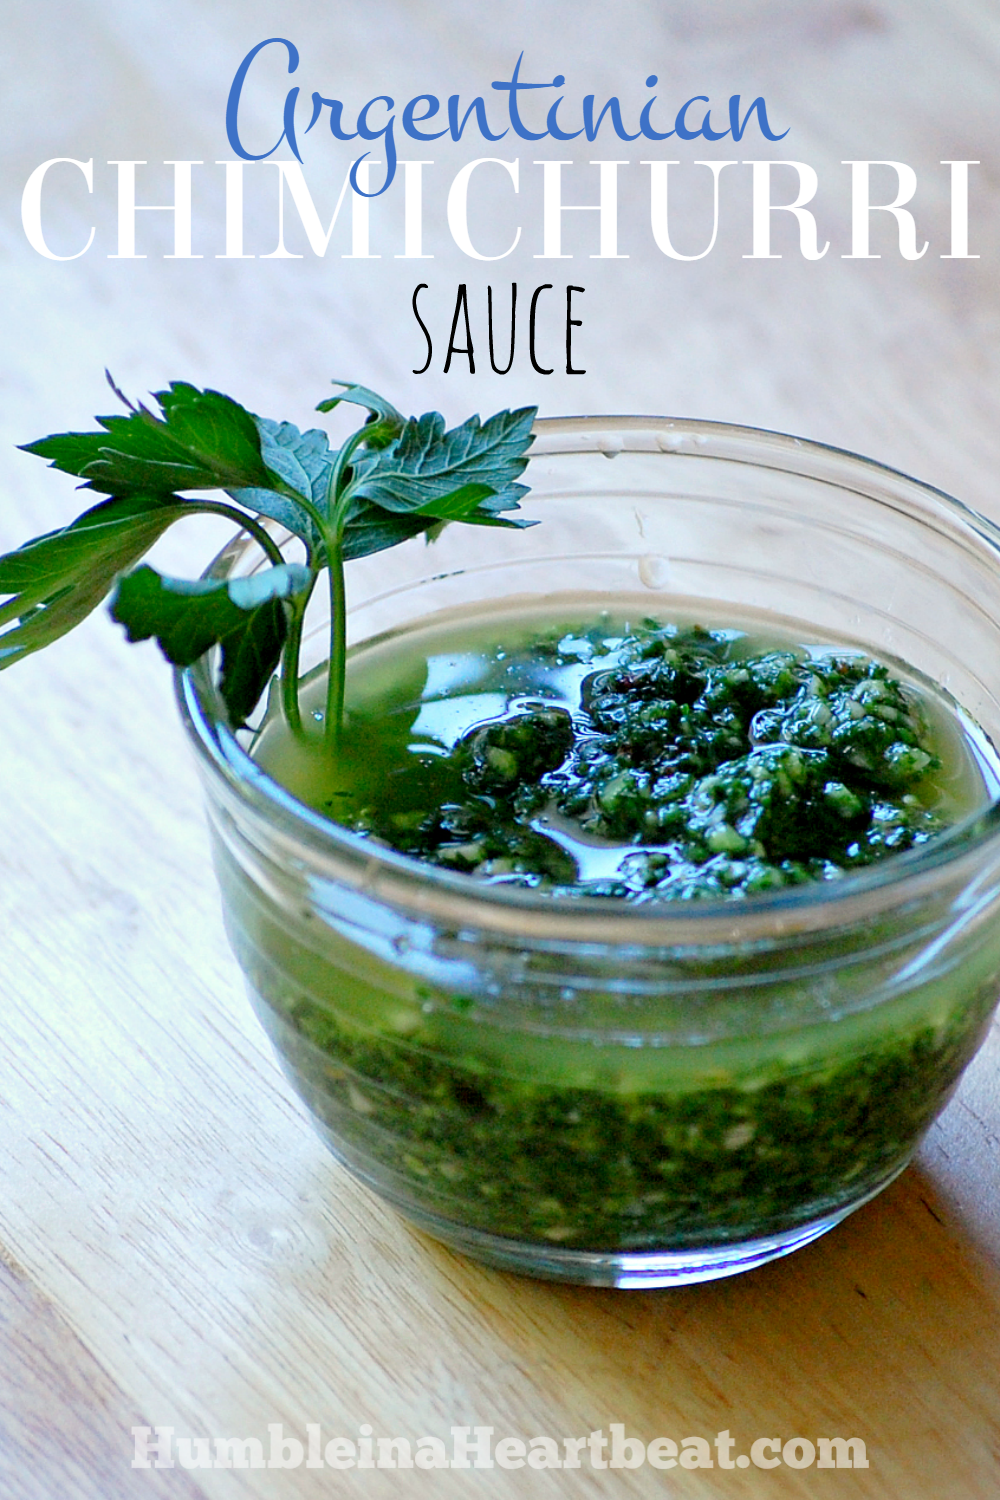 Everyone has their own recipe for Chimichurri sauce, but this one is just like how they make it in Argentina.